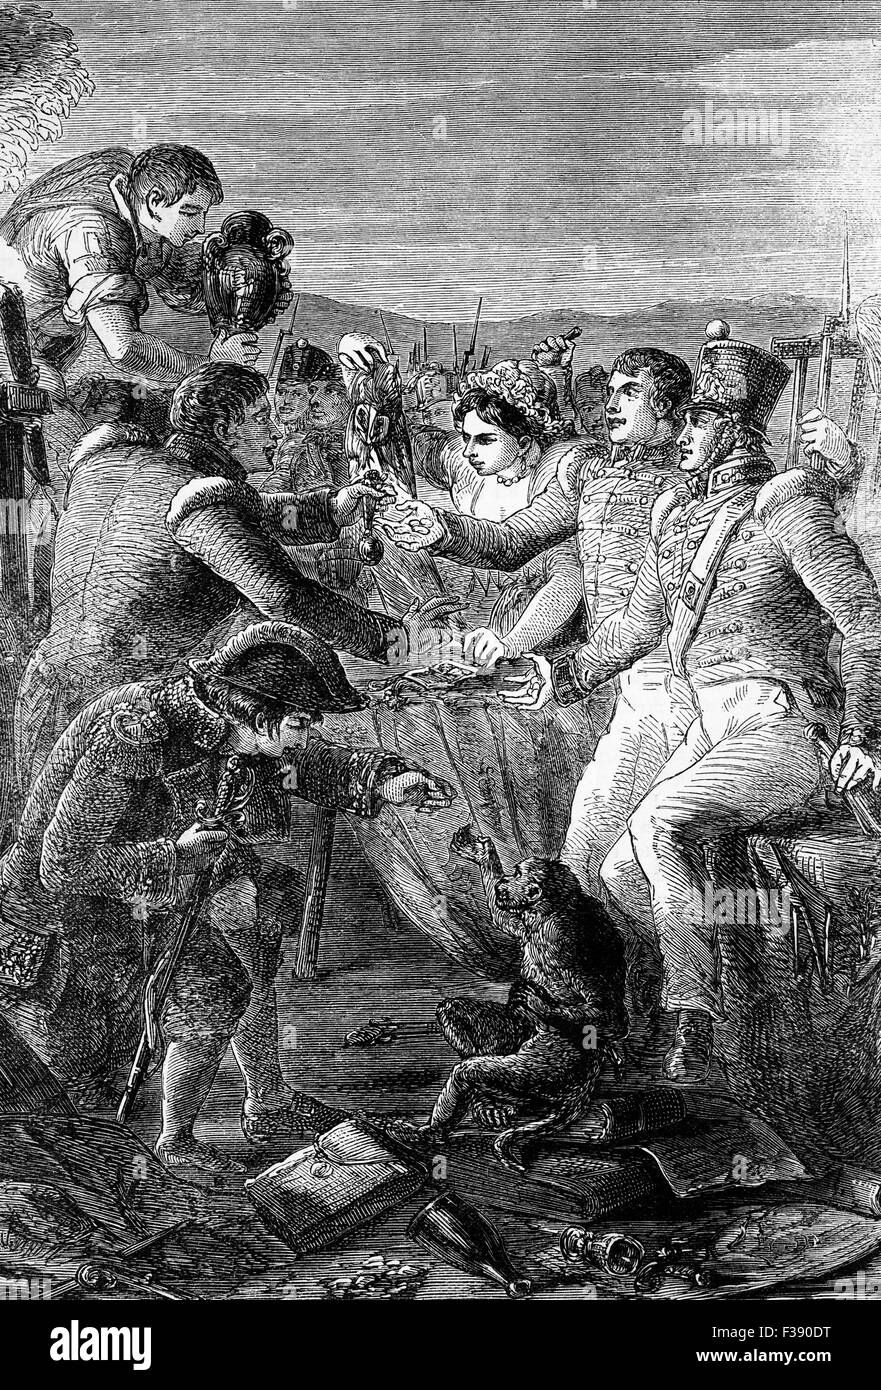 British and Spanish troops dividing the spoils after the Battle of Vitoria (21 June 1813) when an allied British, Portuguese, and Spanish army under General the Marquess of Wellington (Duke of Wellington) broke the French army leading to eventual victory in the Peninsular War. Stock Photo